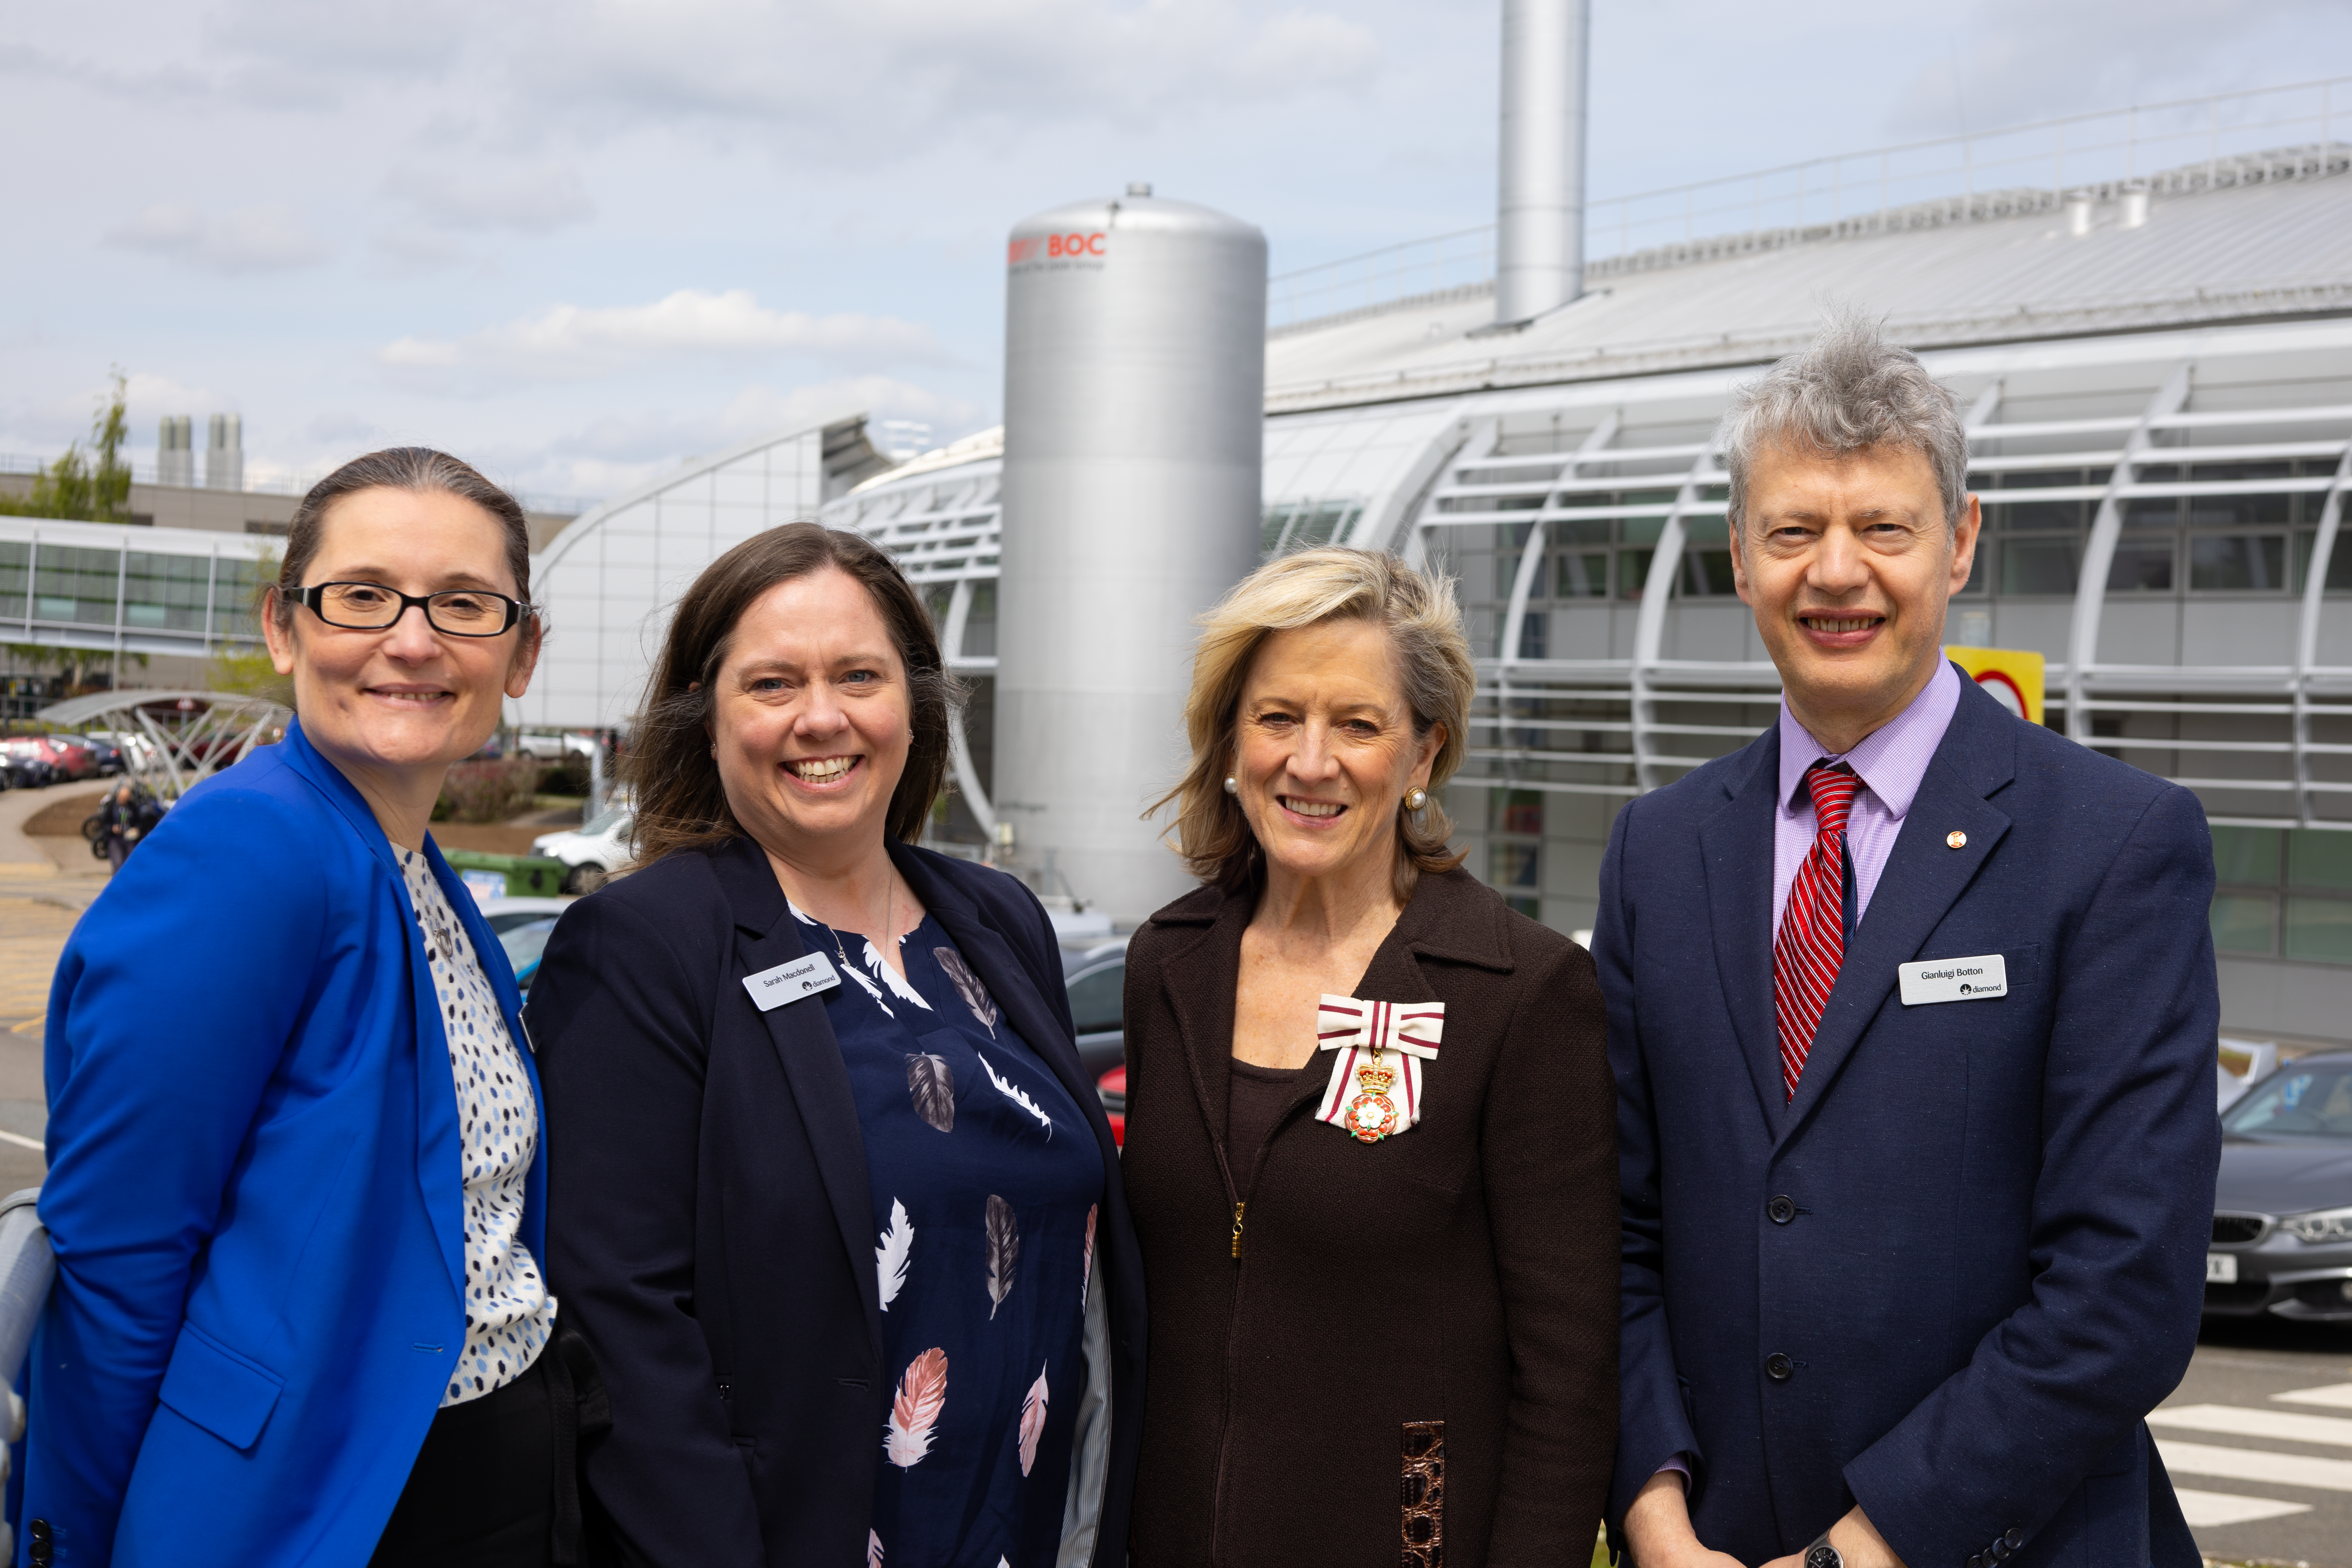 Isabelle Boscaro-Clarke - Head of Impact, Communications and Engagement, Sarah Macdonell - Head of Engineering, Mrs Marjorie Glasgow BEM - Lord-Lieutenant of Oxfordshire and Diamond CEO - Gianluigi Botton